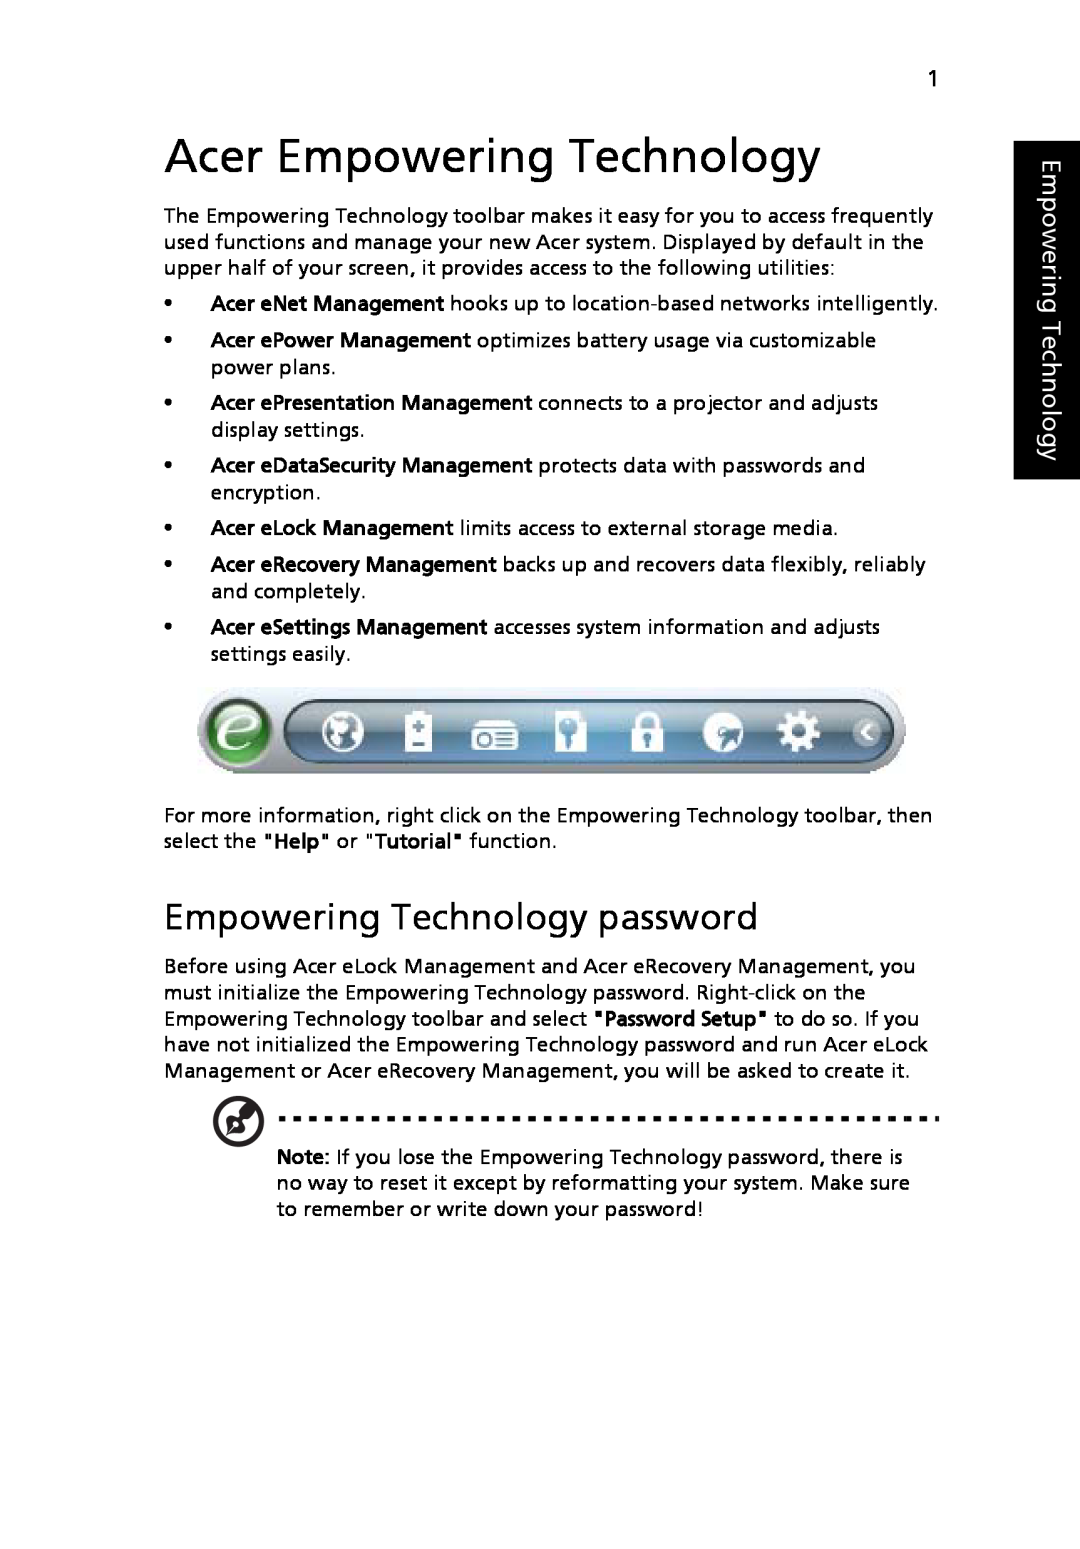 Acer 9120 manual Acer Empowering Technology, Empowering Technology password 